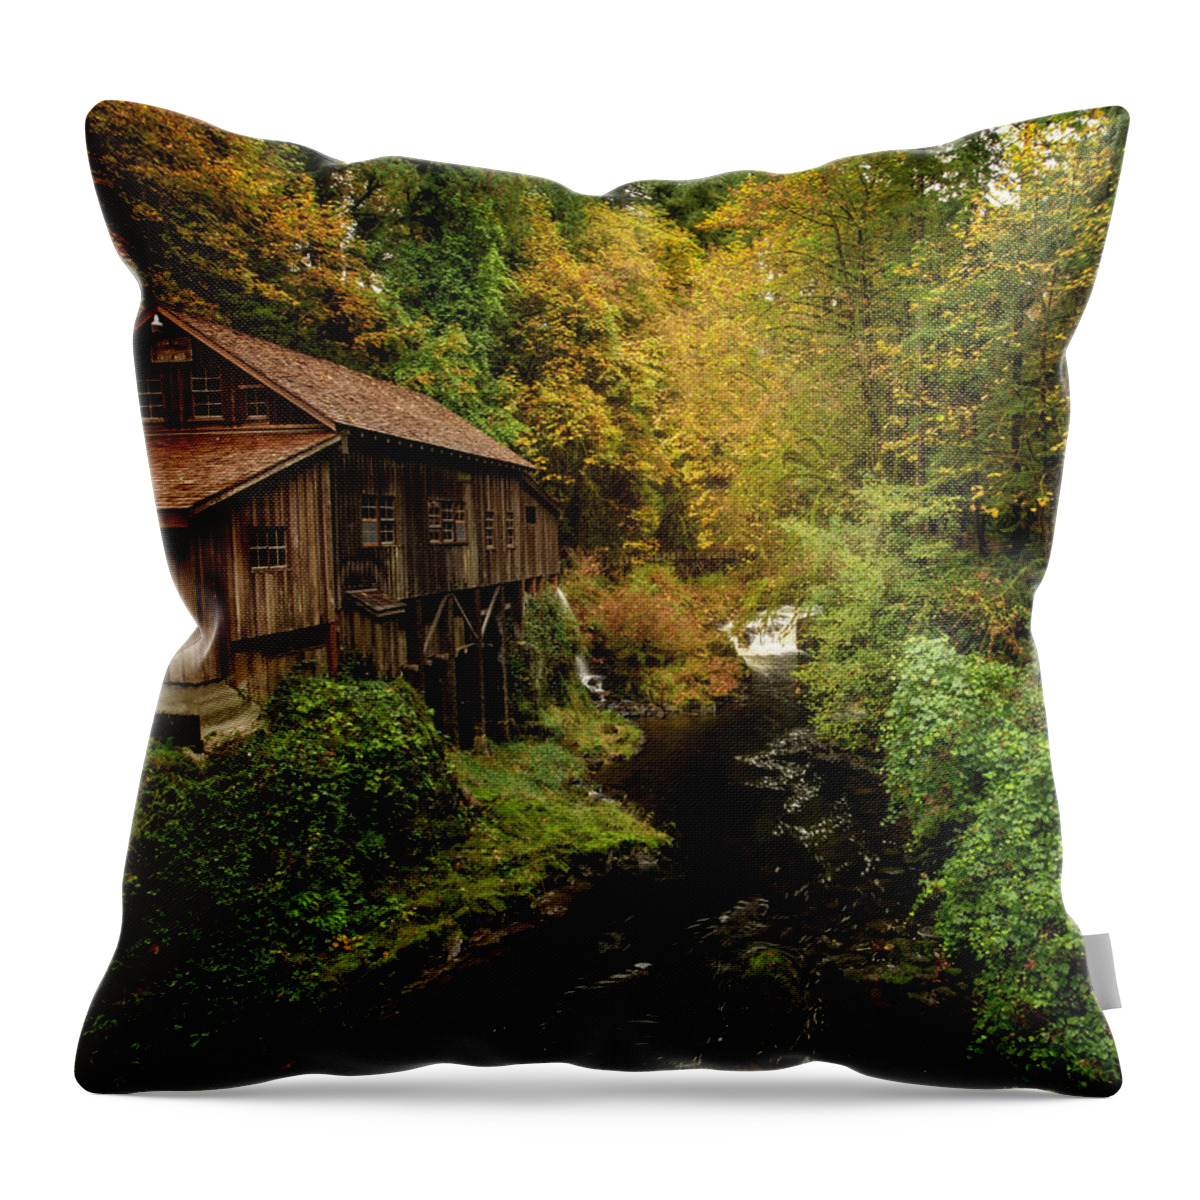 Grist Mill Autumn Throw Pillow featuring the photograph Grist Mill Autumn by Wes and Dotty Weber